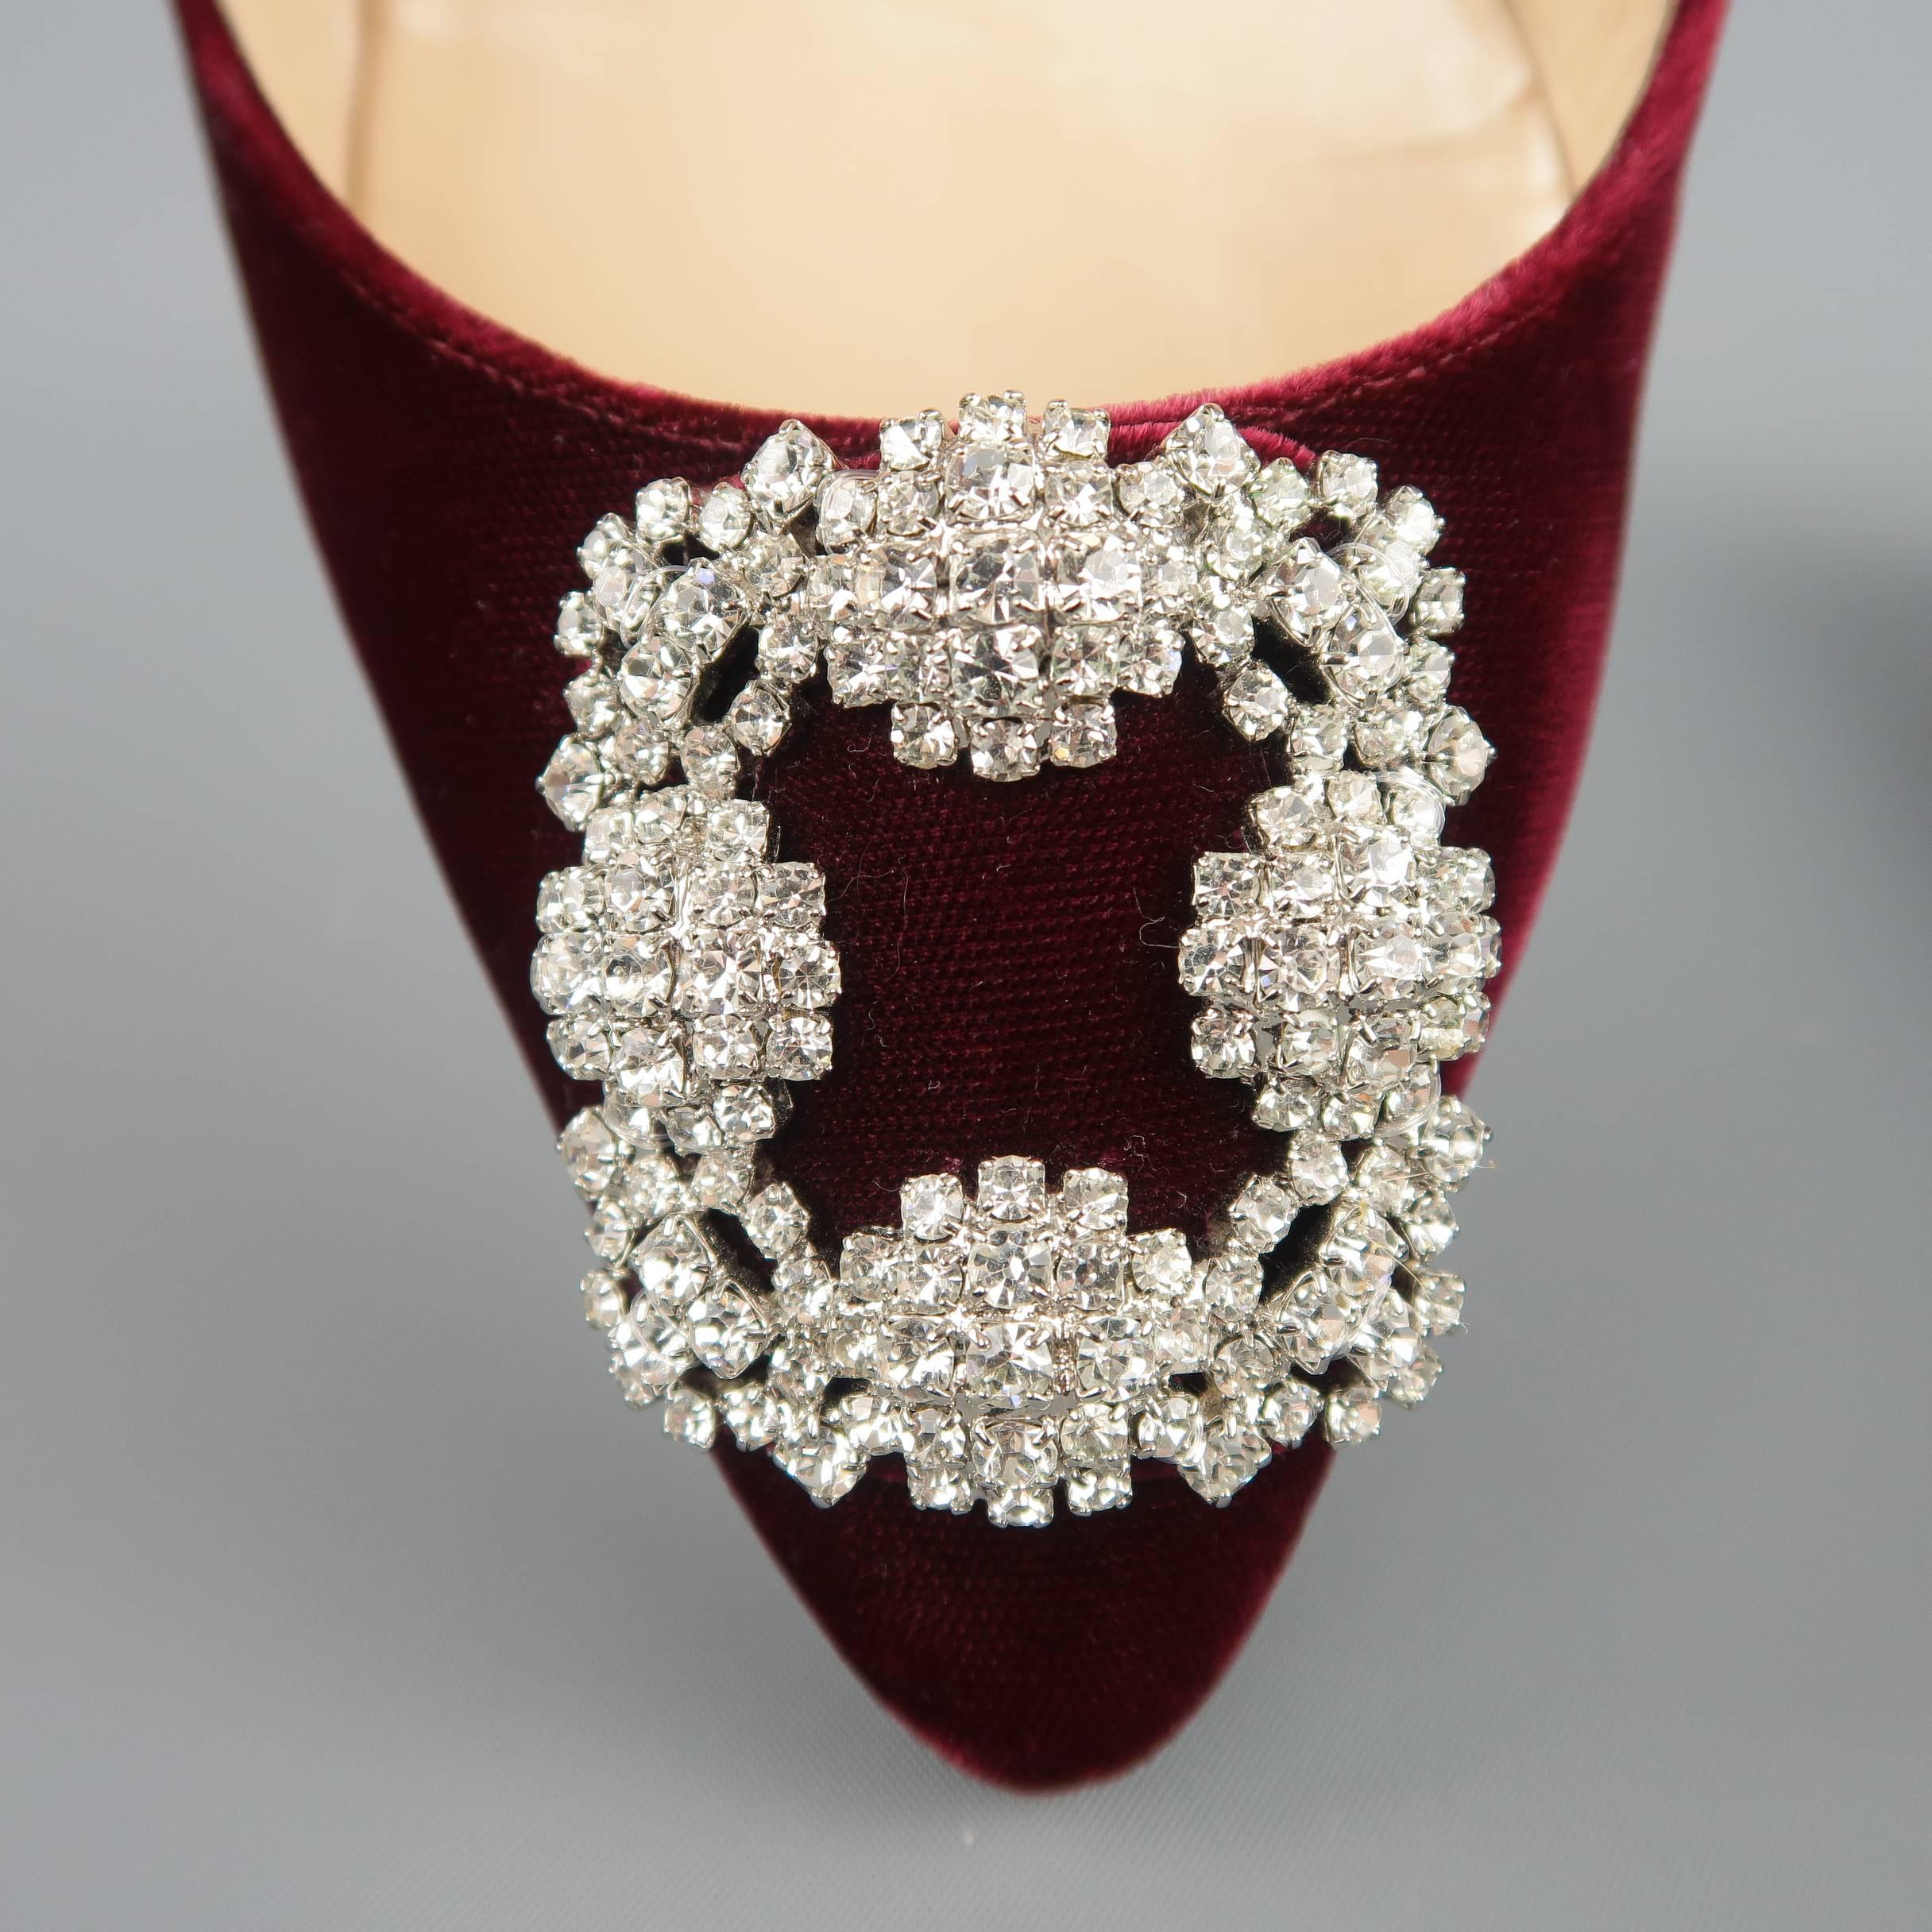 MANOLO BLAHNIK Hangisi flats come in burgundy velvet with a pointed toe, Swarovski crystal studded buckle embellishment, and covered heel. Minor wear through velvet. As-is. Handmade in Italy.
 
Good Pre-Owned Condition.
Marked:IT 37.5
 
Outsole: